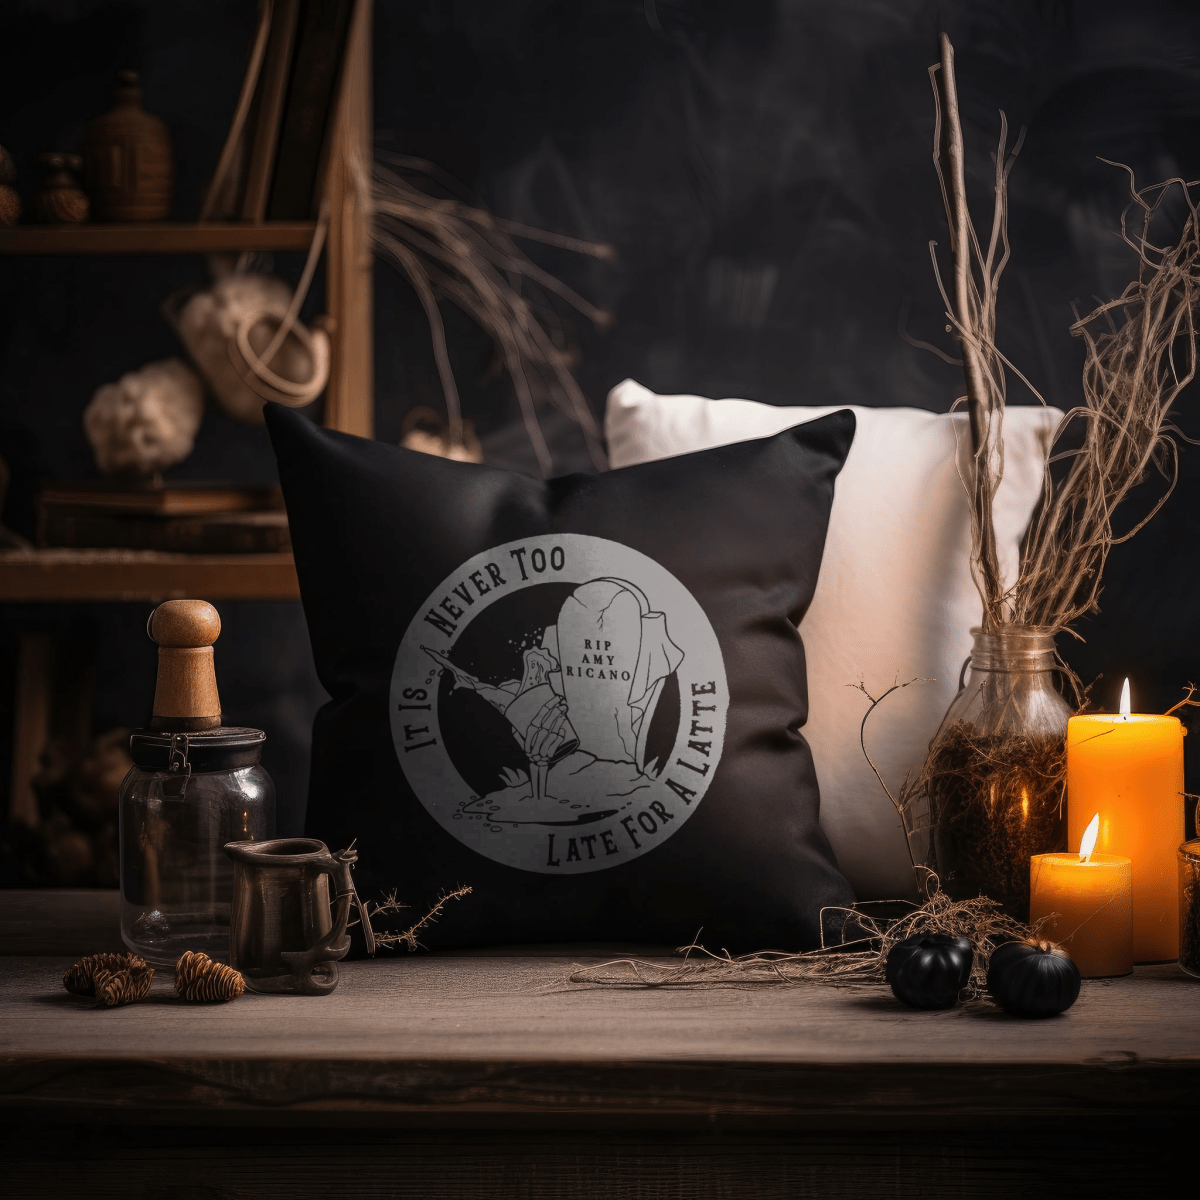 Never Too Late For A Latte Gothic Cushion - The Gothic Stationery Company - Homeware